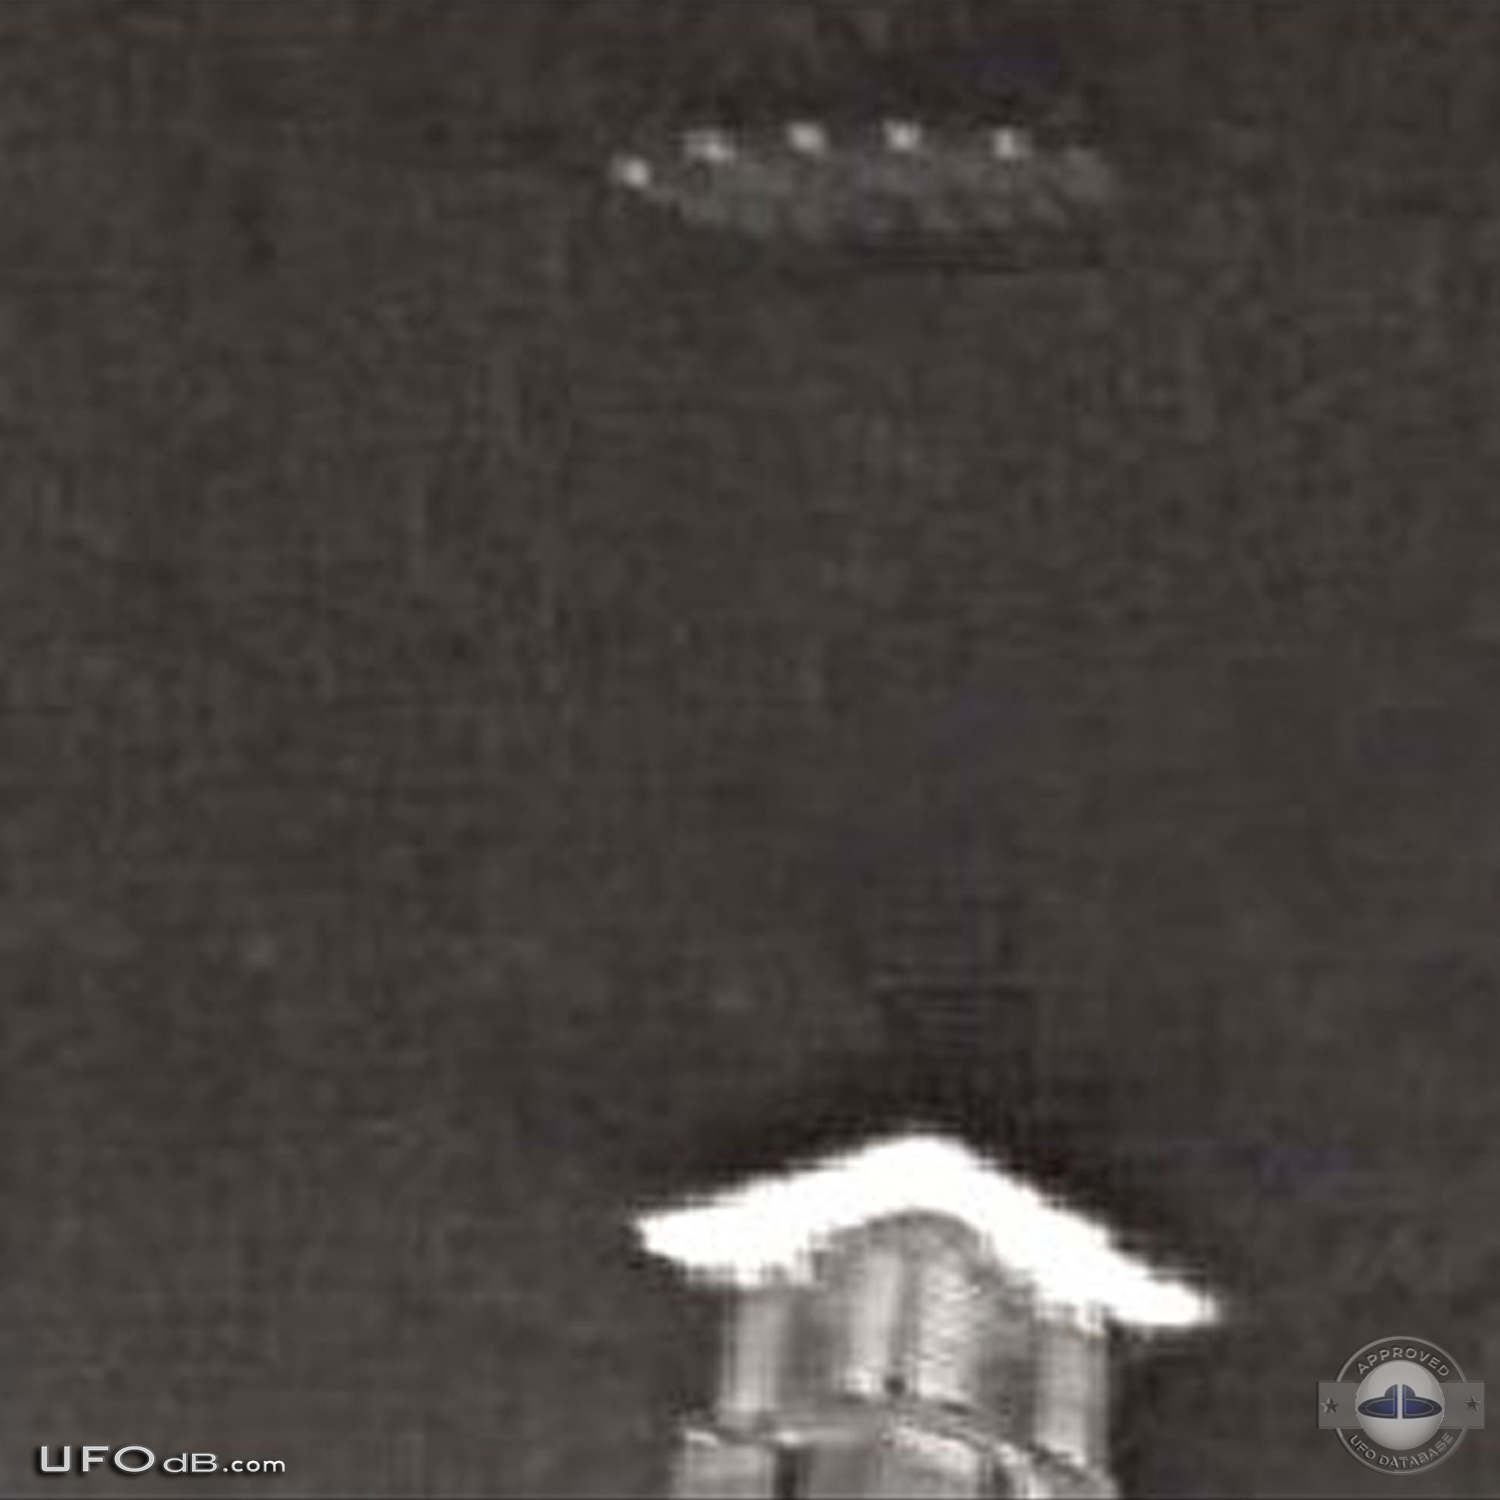 2003 UFO sighting from Dubai caught on picture by a programmer UFO Picture #462-2